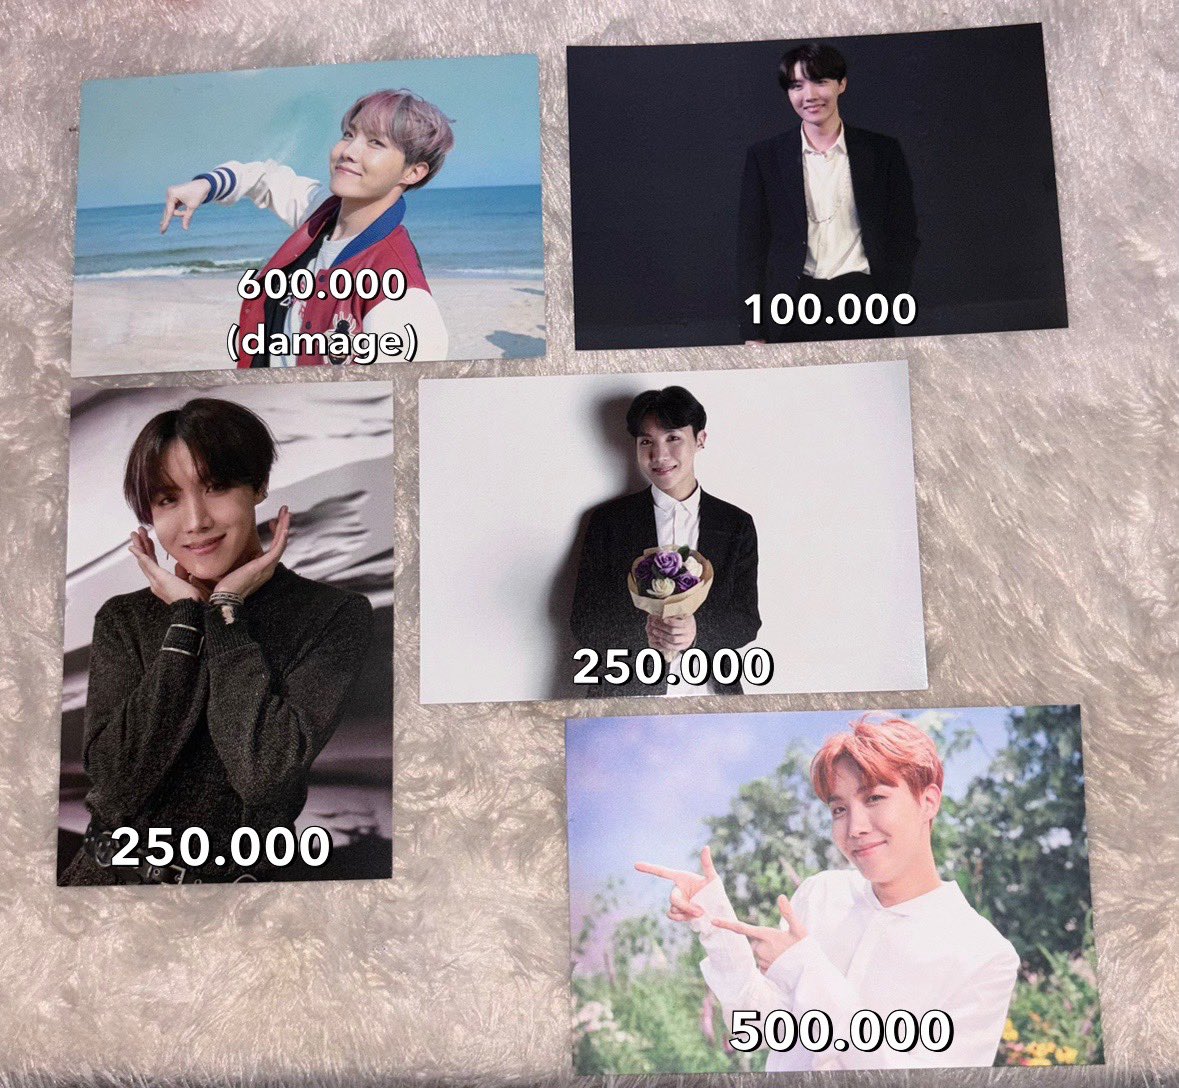 WTS Want To Sell Jhope Broadcast 💸 on pict Only take all. 📍Bogor, INA ❌ exclude admin ✅ Include Packing ✅ Negotiate ✅ Full payment / split sisain 50.000